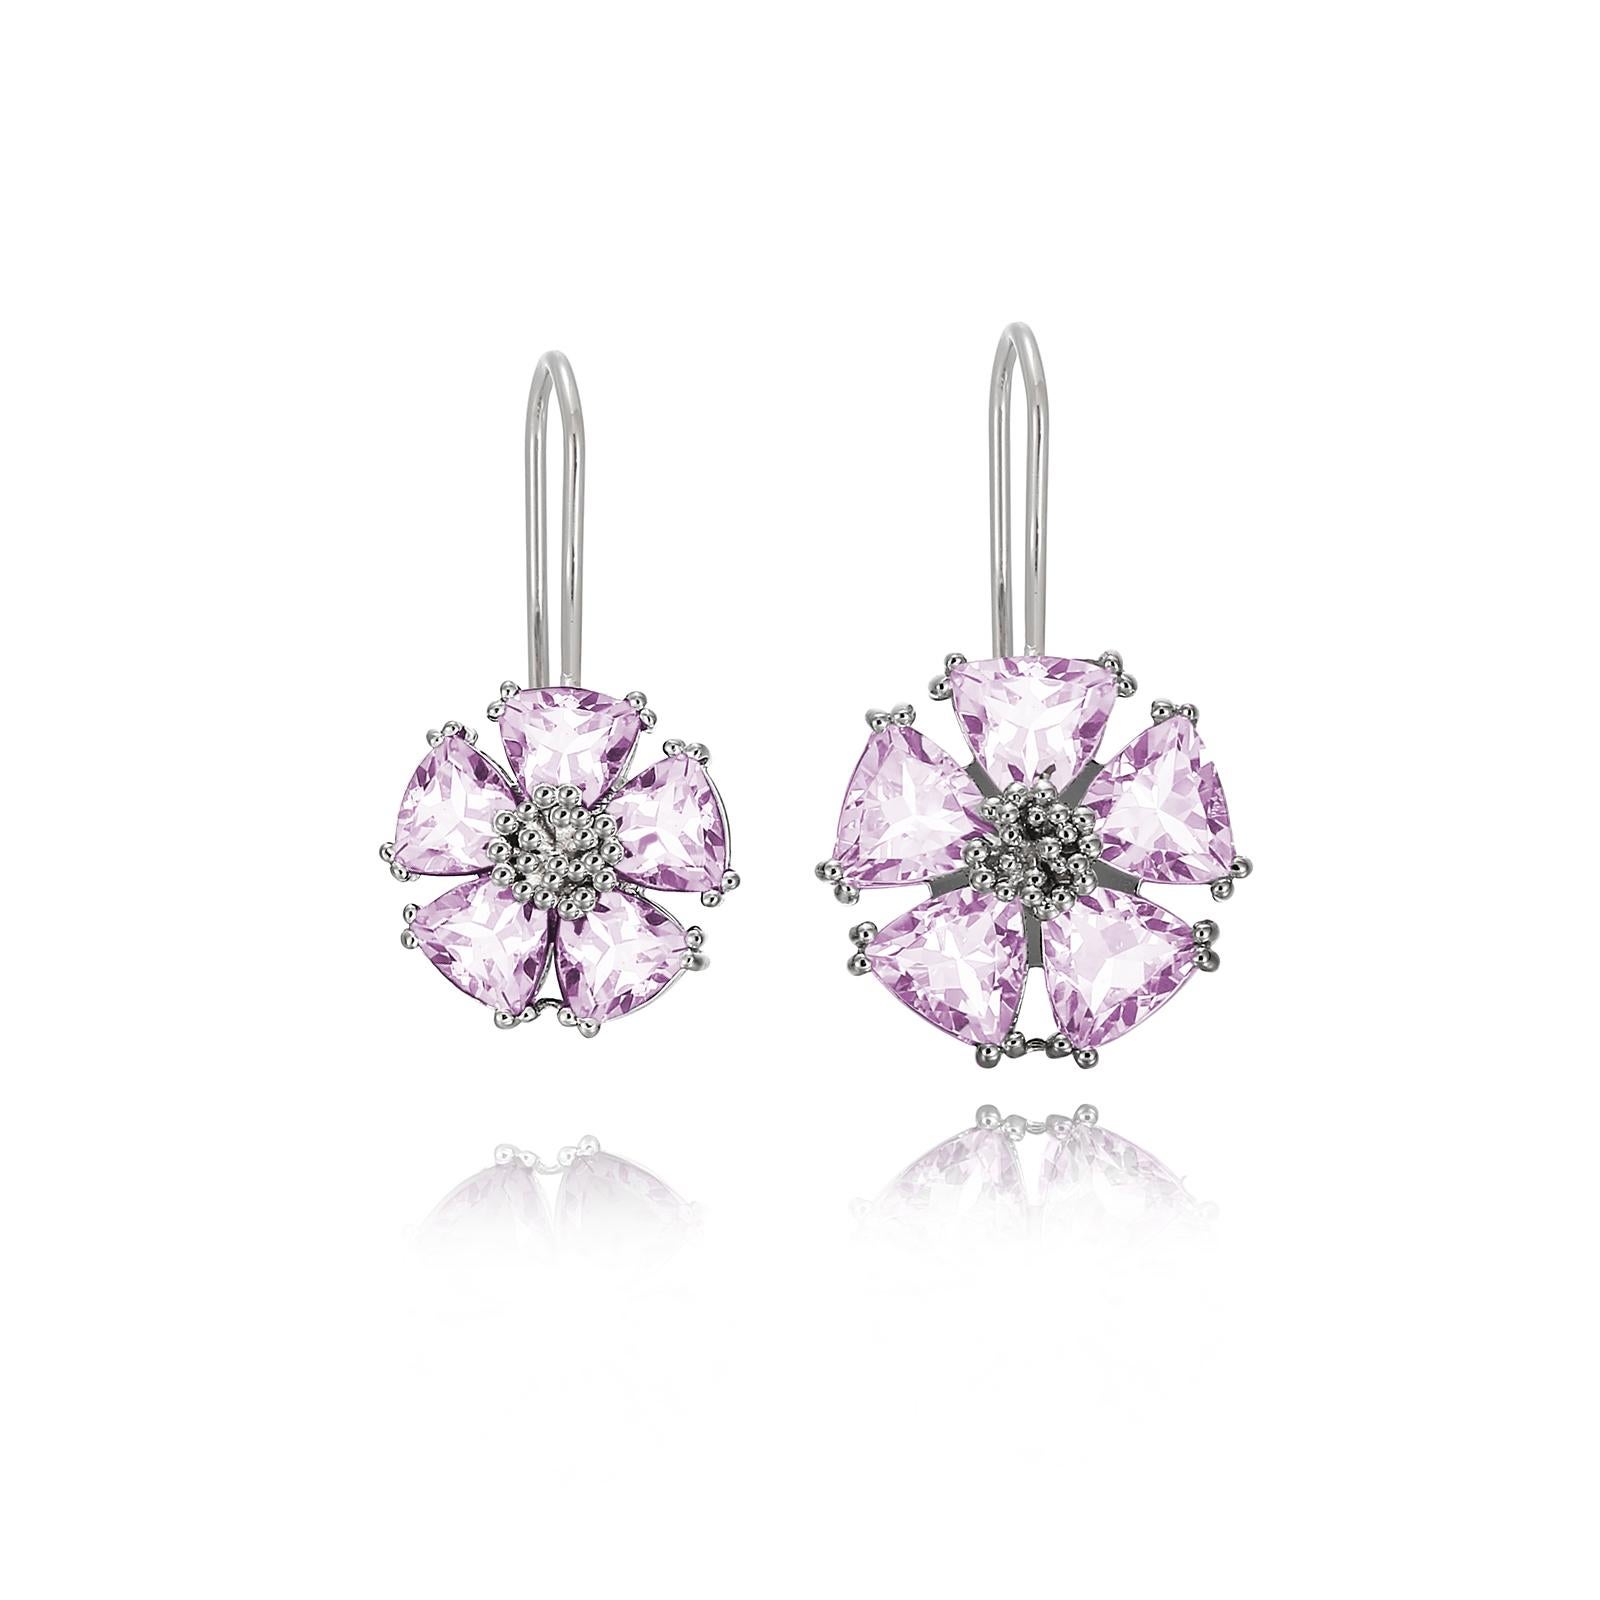 Designed in NYC

.925 Sterling Silver 2 x 10 mm Amethyst Blossom Large Stone Mismatched Wire Earrings. No matter the season, allow natural beauty to surround you wherever you go. Blossom large stone mismatched wire earrings: 

Sterling silver